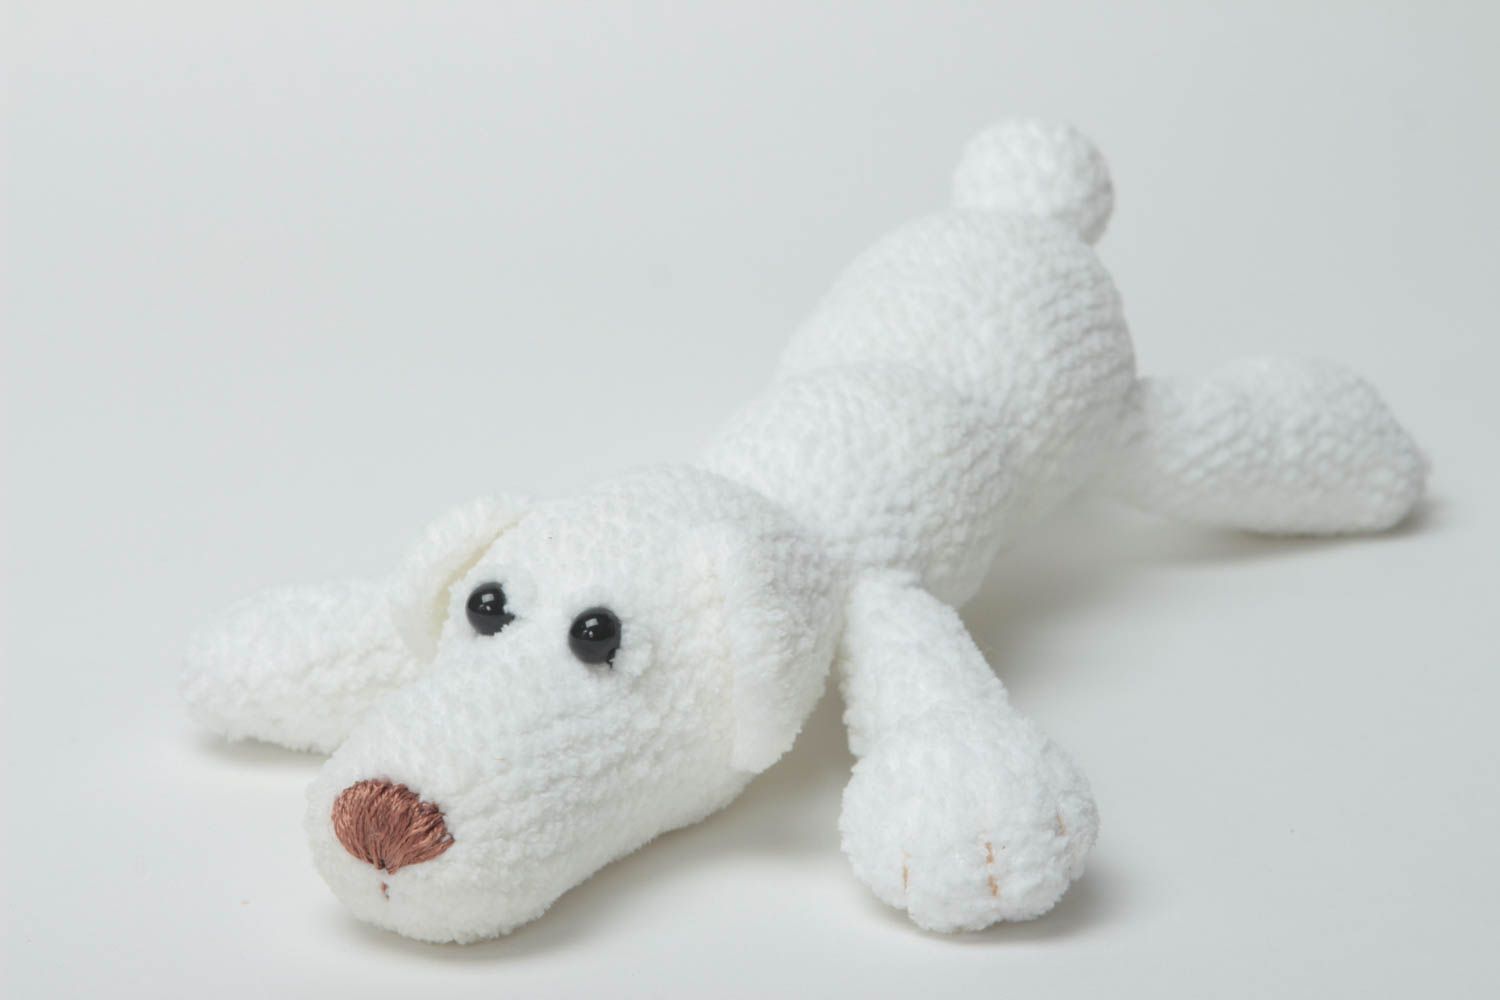 Handmade white crocheted toy unusual cute soft toy designer textile accessory photo 2